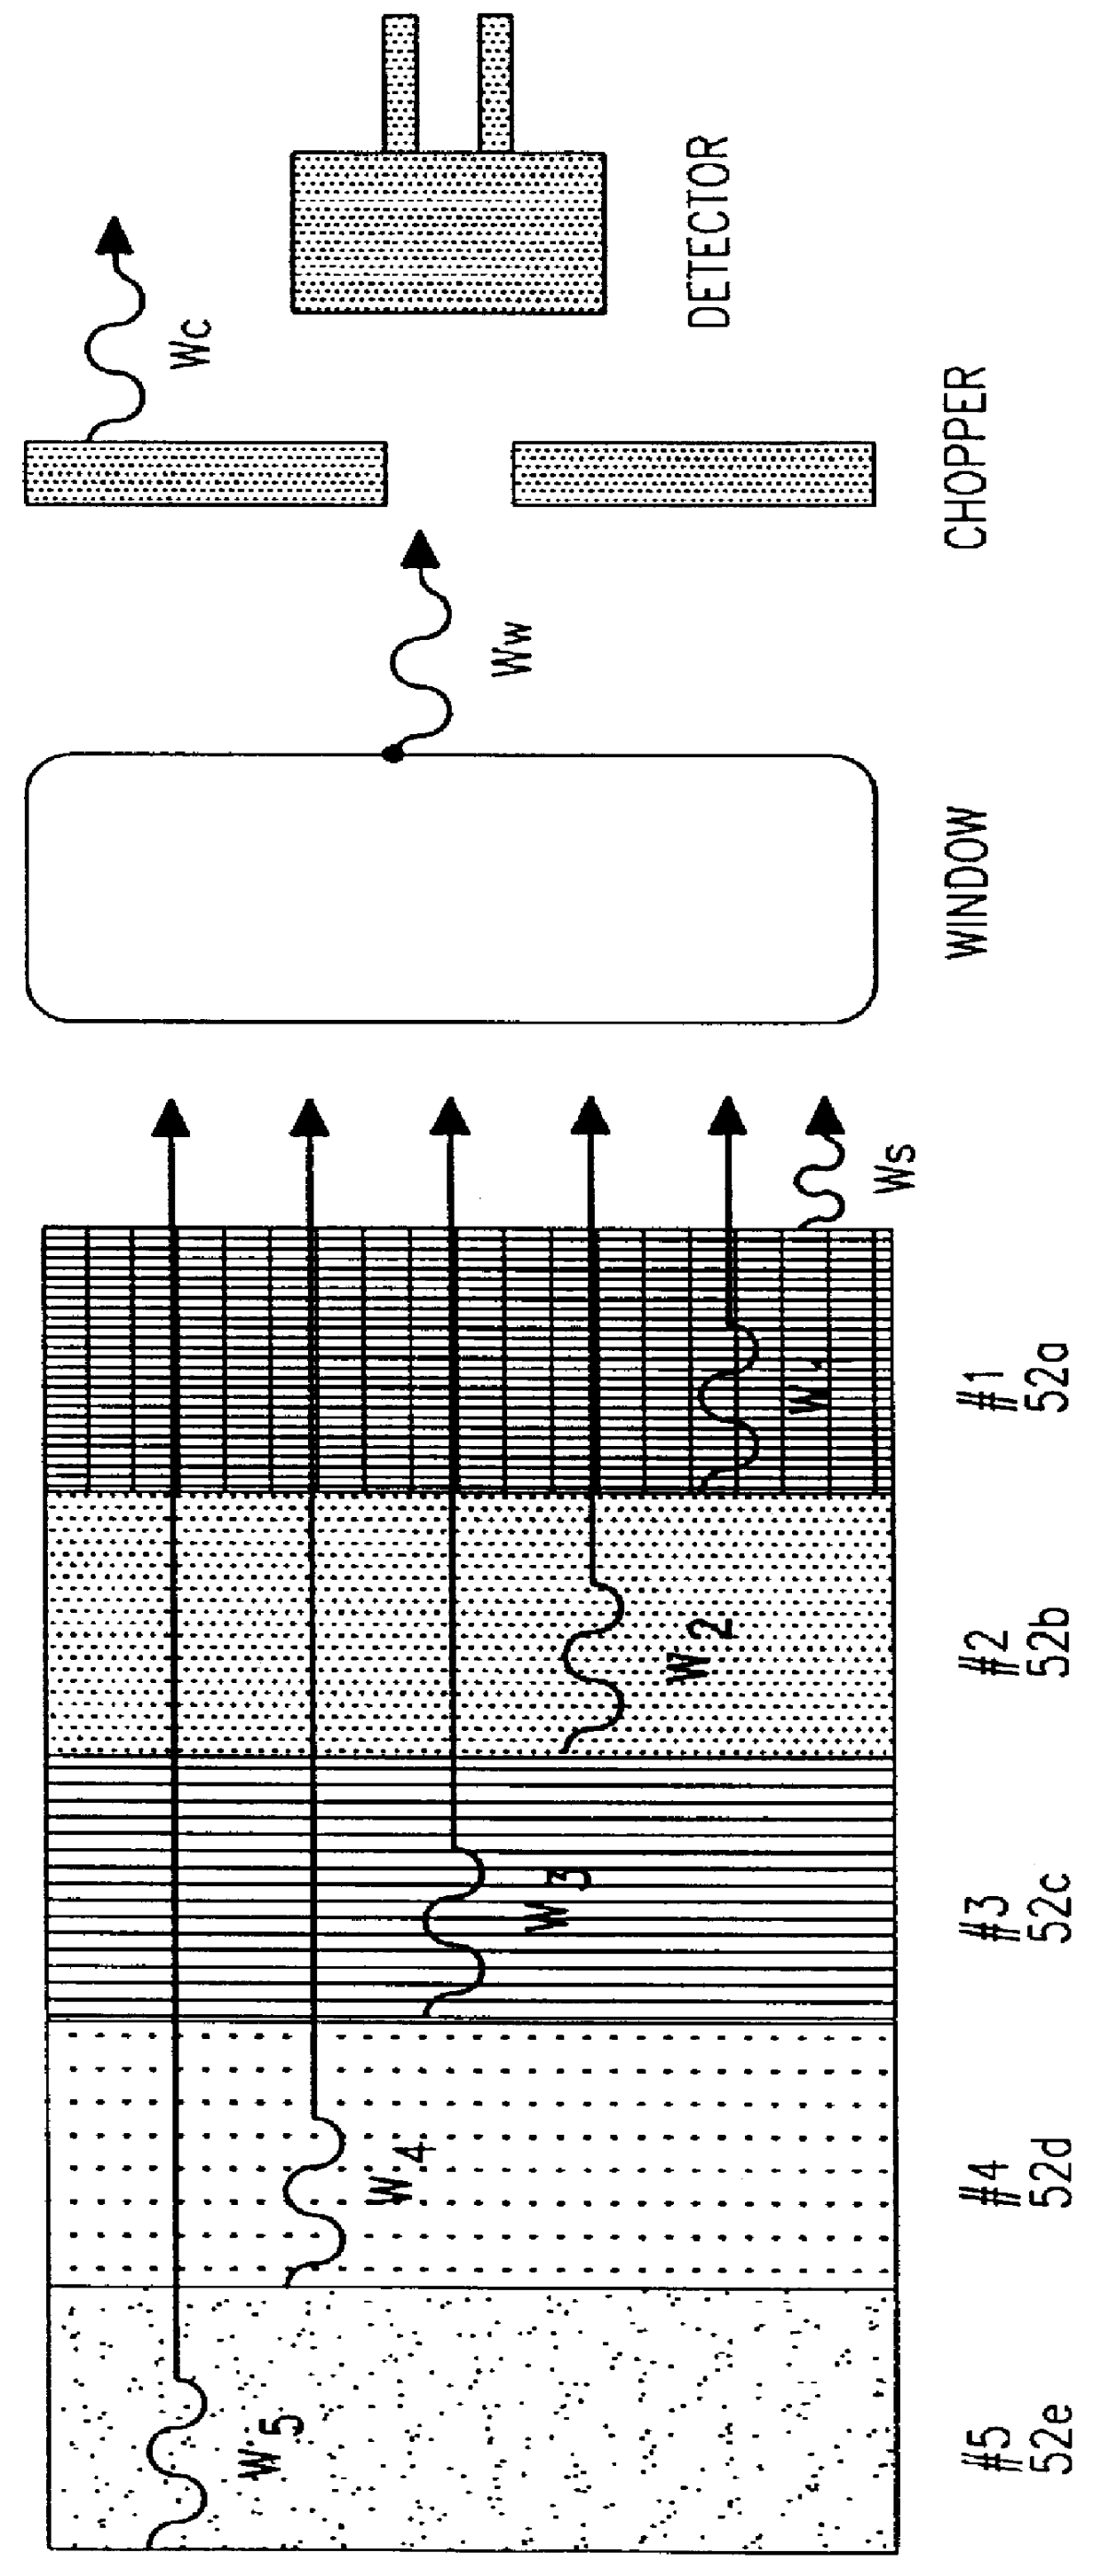 Subsurface thermal gradient spectrometry